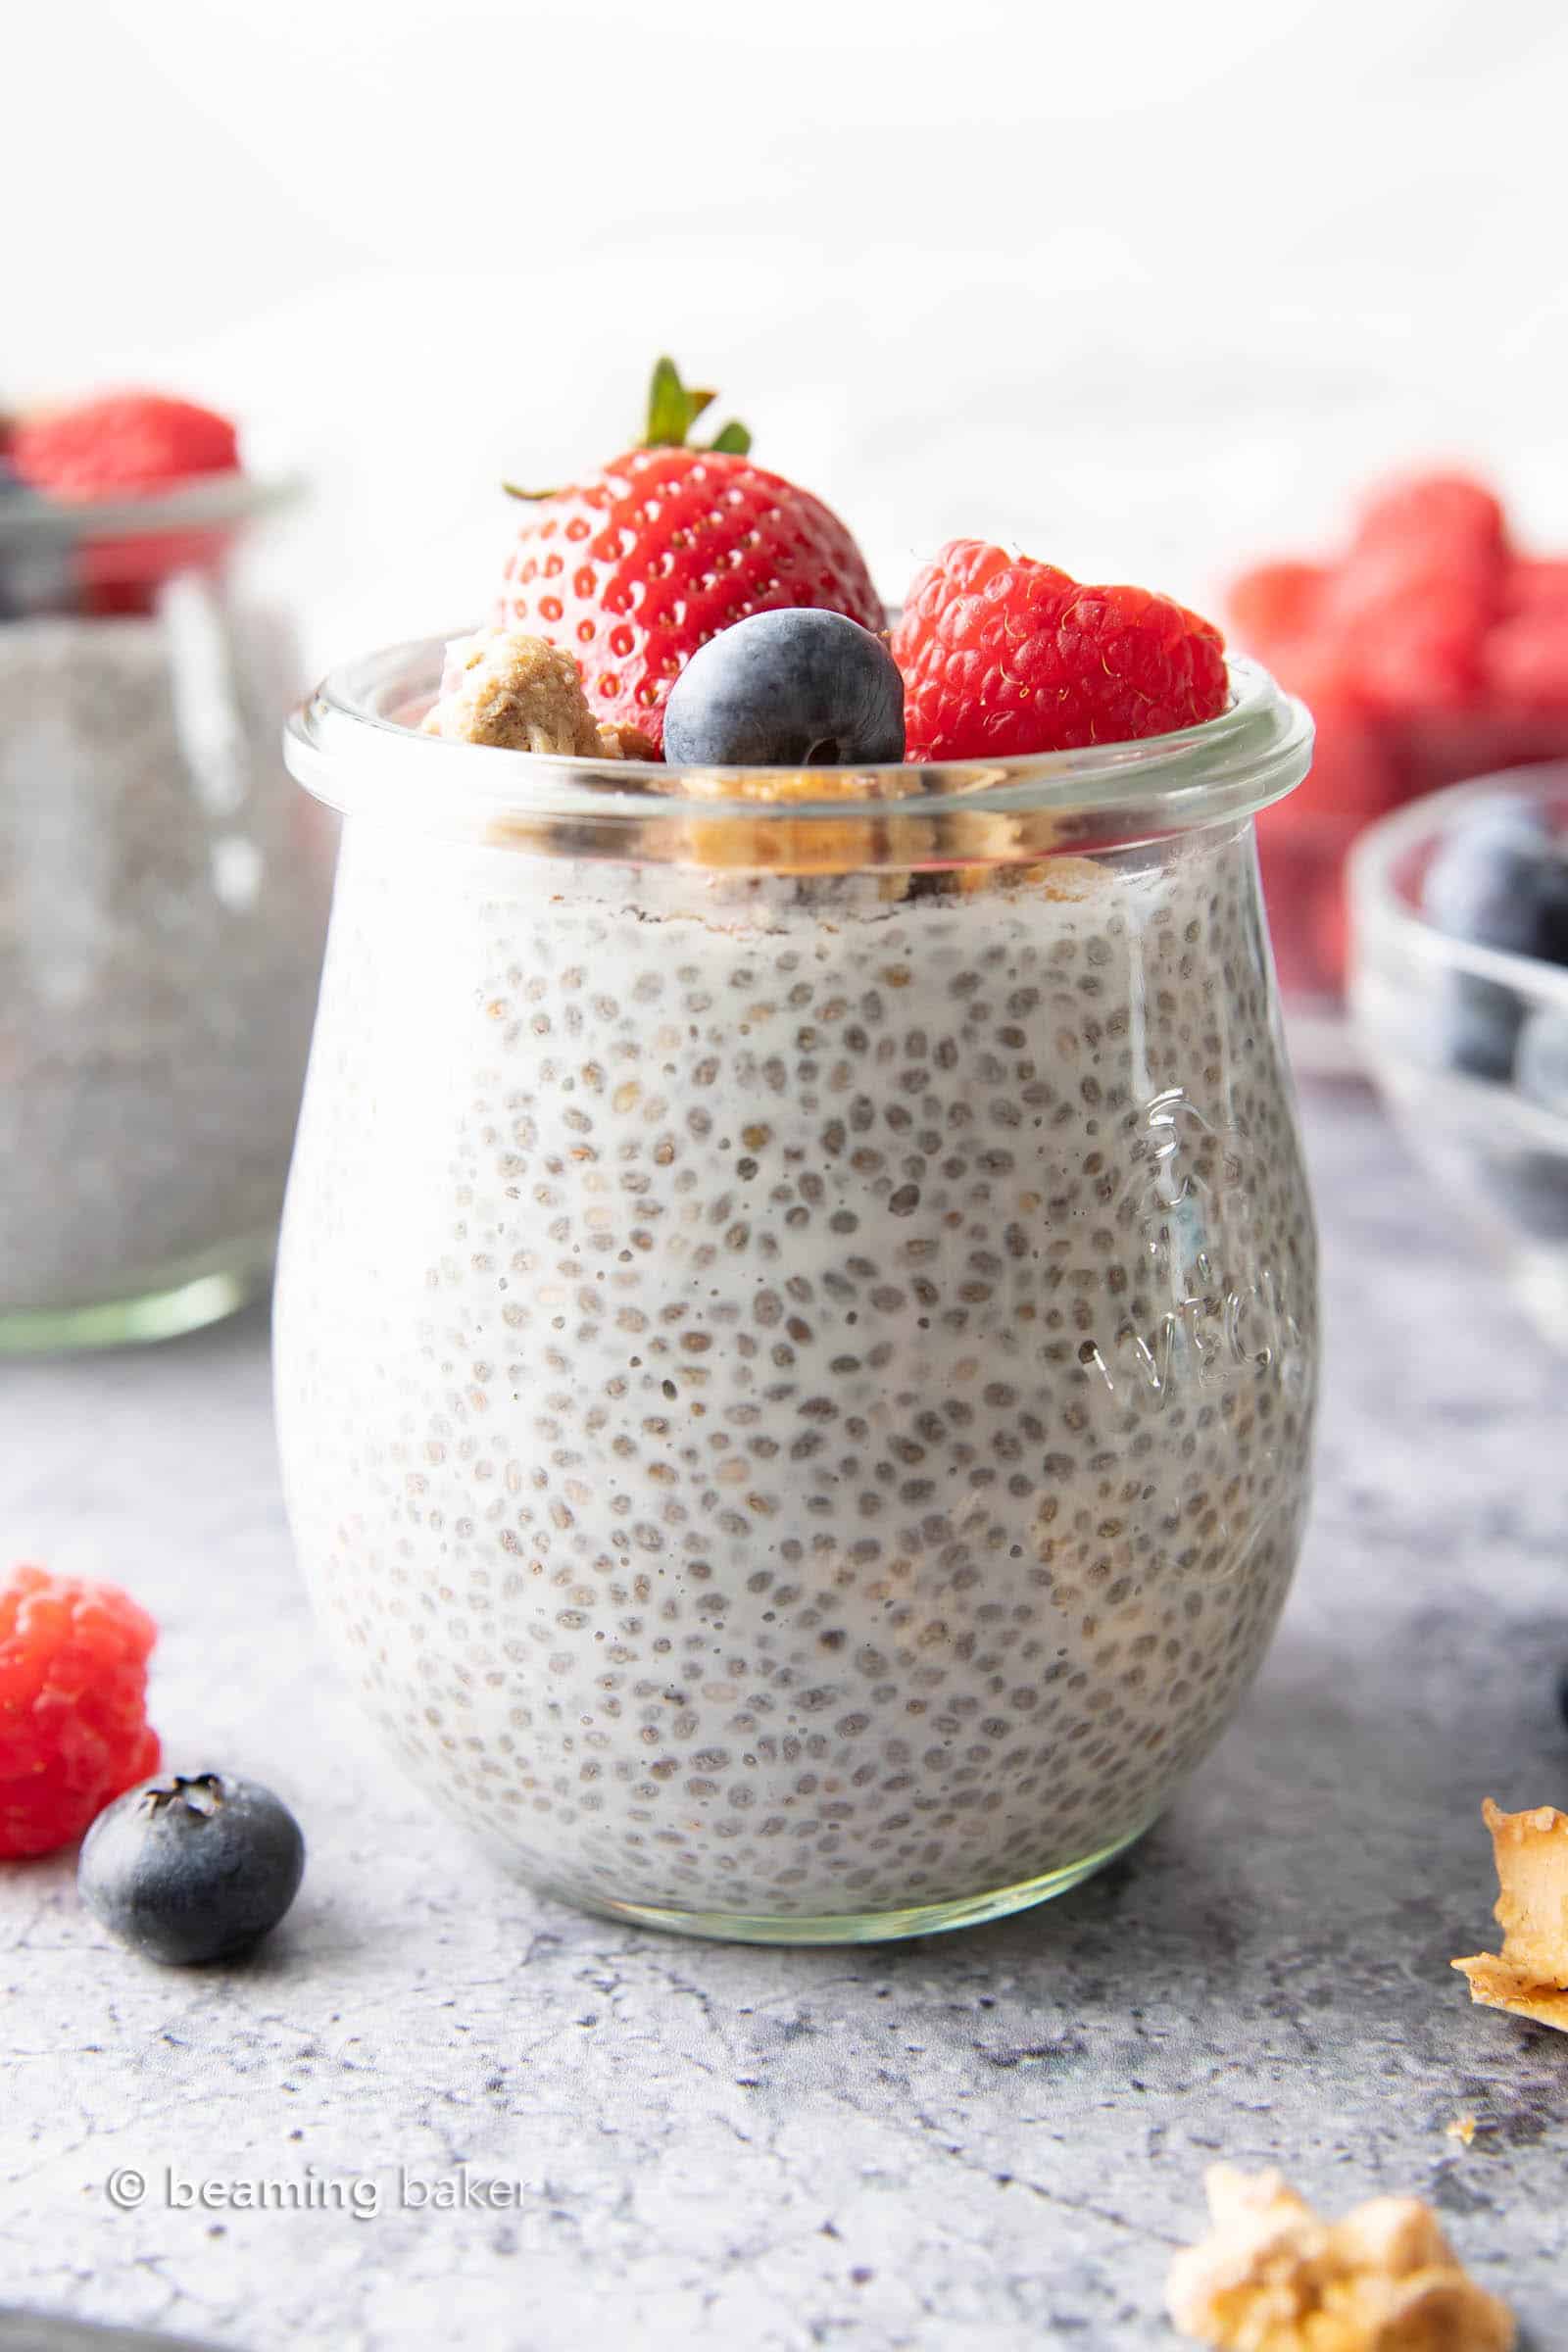 Keto Chia Pudding: this delicious & creamy keto chia pudding recipe needs only 4 ingredients! Just 4 net carbs per serving. Low Carb. #Keto #LowCarb #ChiaPudding #KetoDesserts #ChiaSeeds | Recipe at BeamingBaker.com